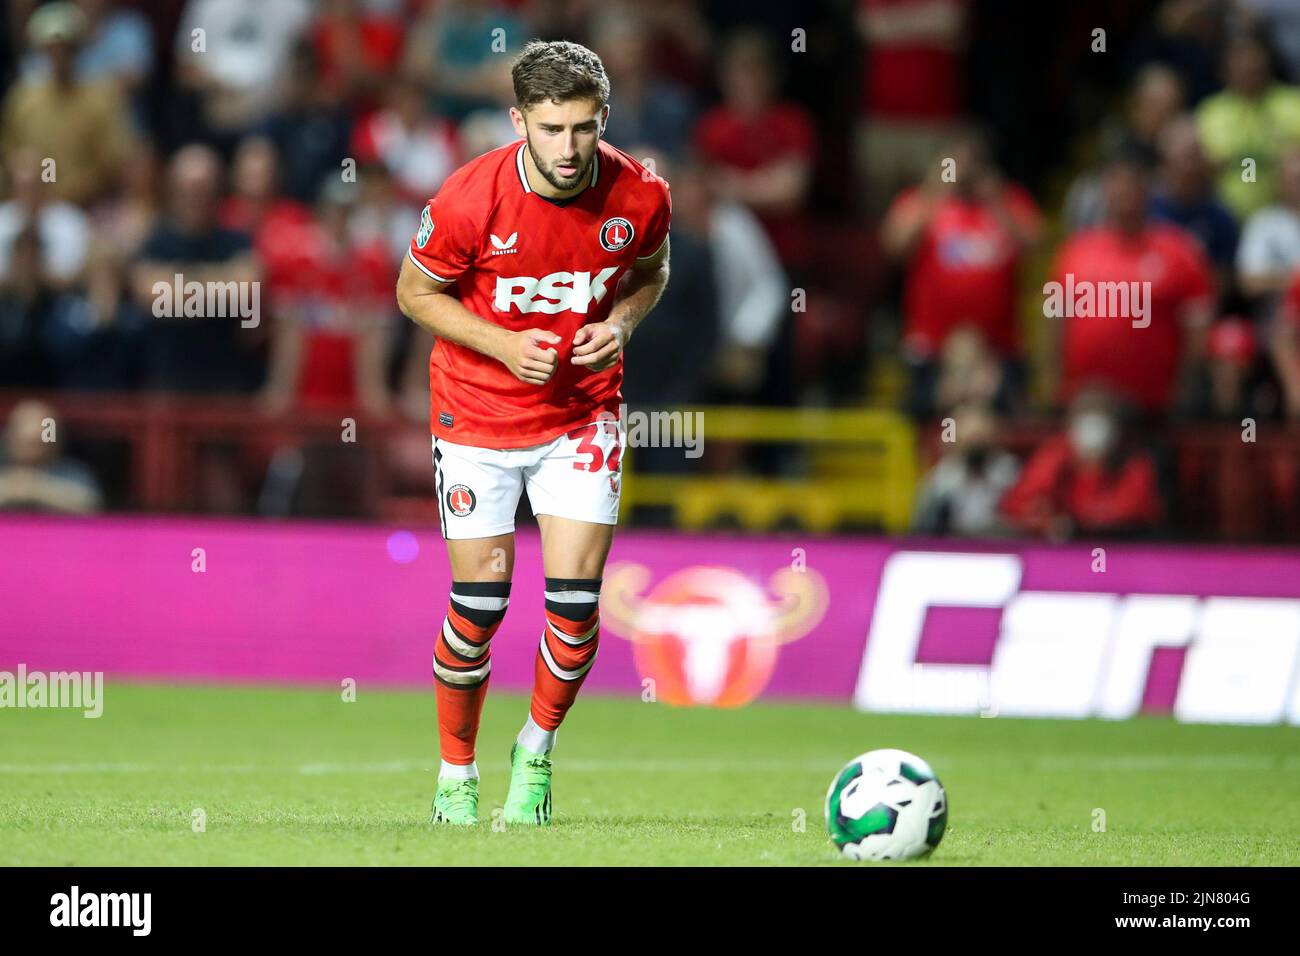 The Valley, London on Tuesday 9th August 2022. Aaron Henry of Charlton Athletic prepares to take a penalty during the Carabao Cup match between Charlton Athletic and Queens Park Rangers at The Valley, London on Tuesday 9th August 2022. (Credit: Tom West | MI News) Credit: MI News & Sport /Alamy Live News Stock Photo